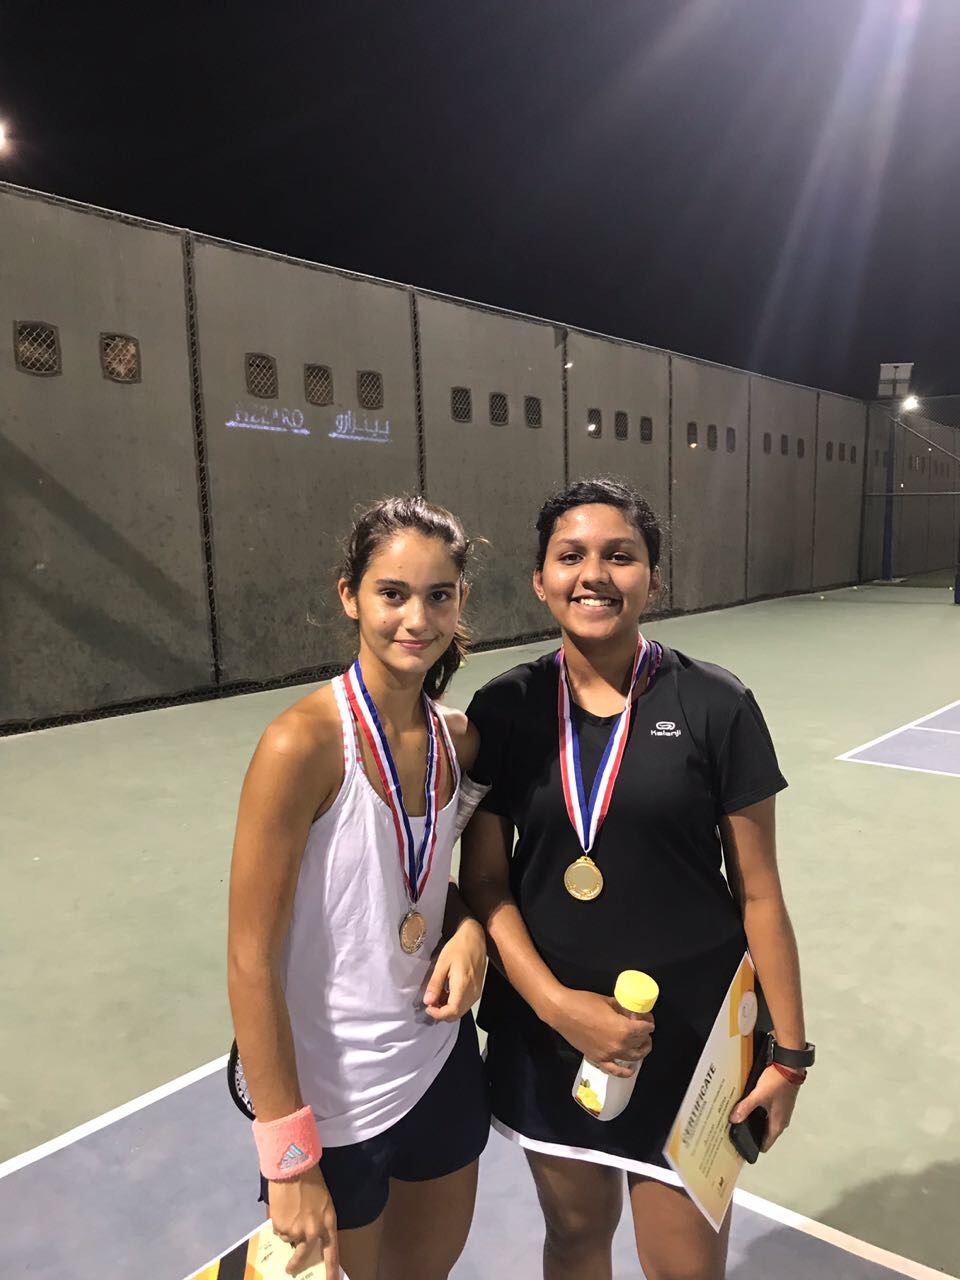 The author, Anjana, and a friend pose on a tennis court while wearing medallions.